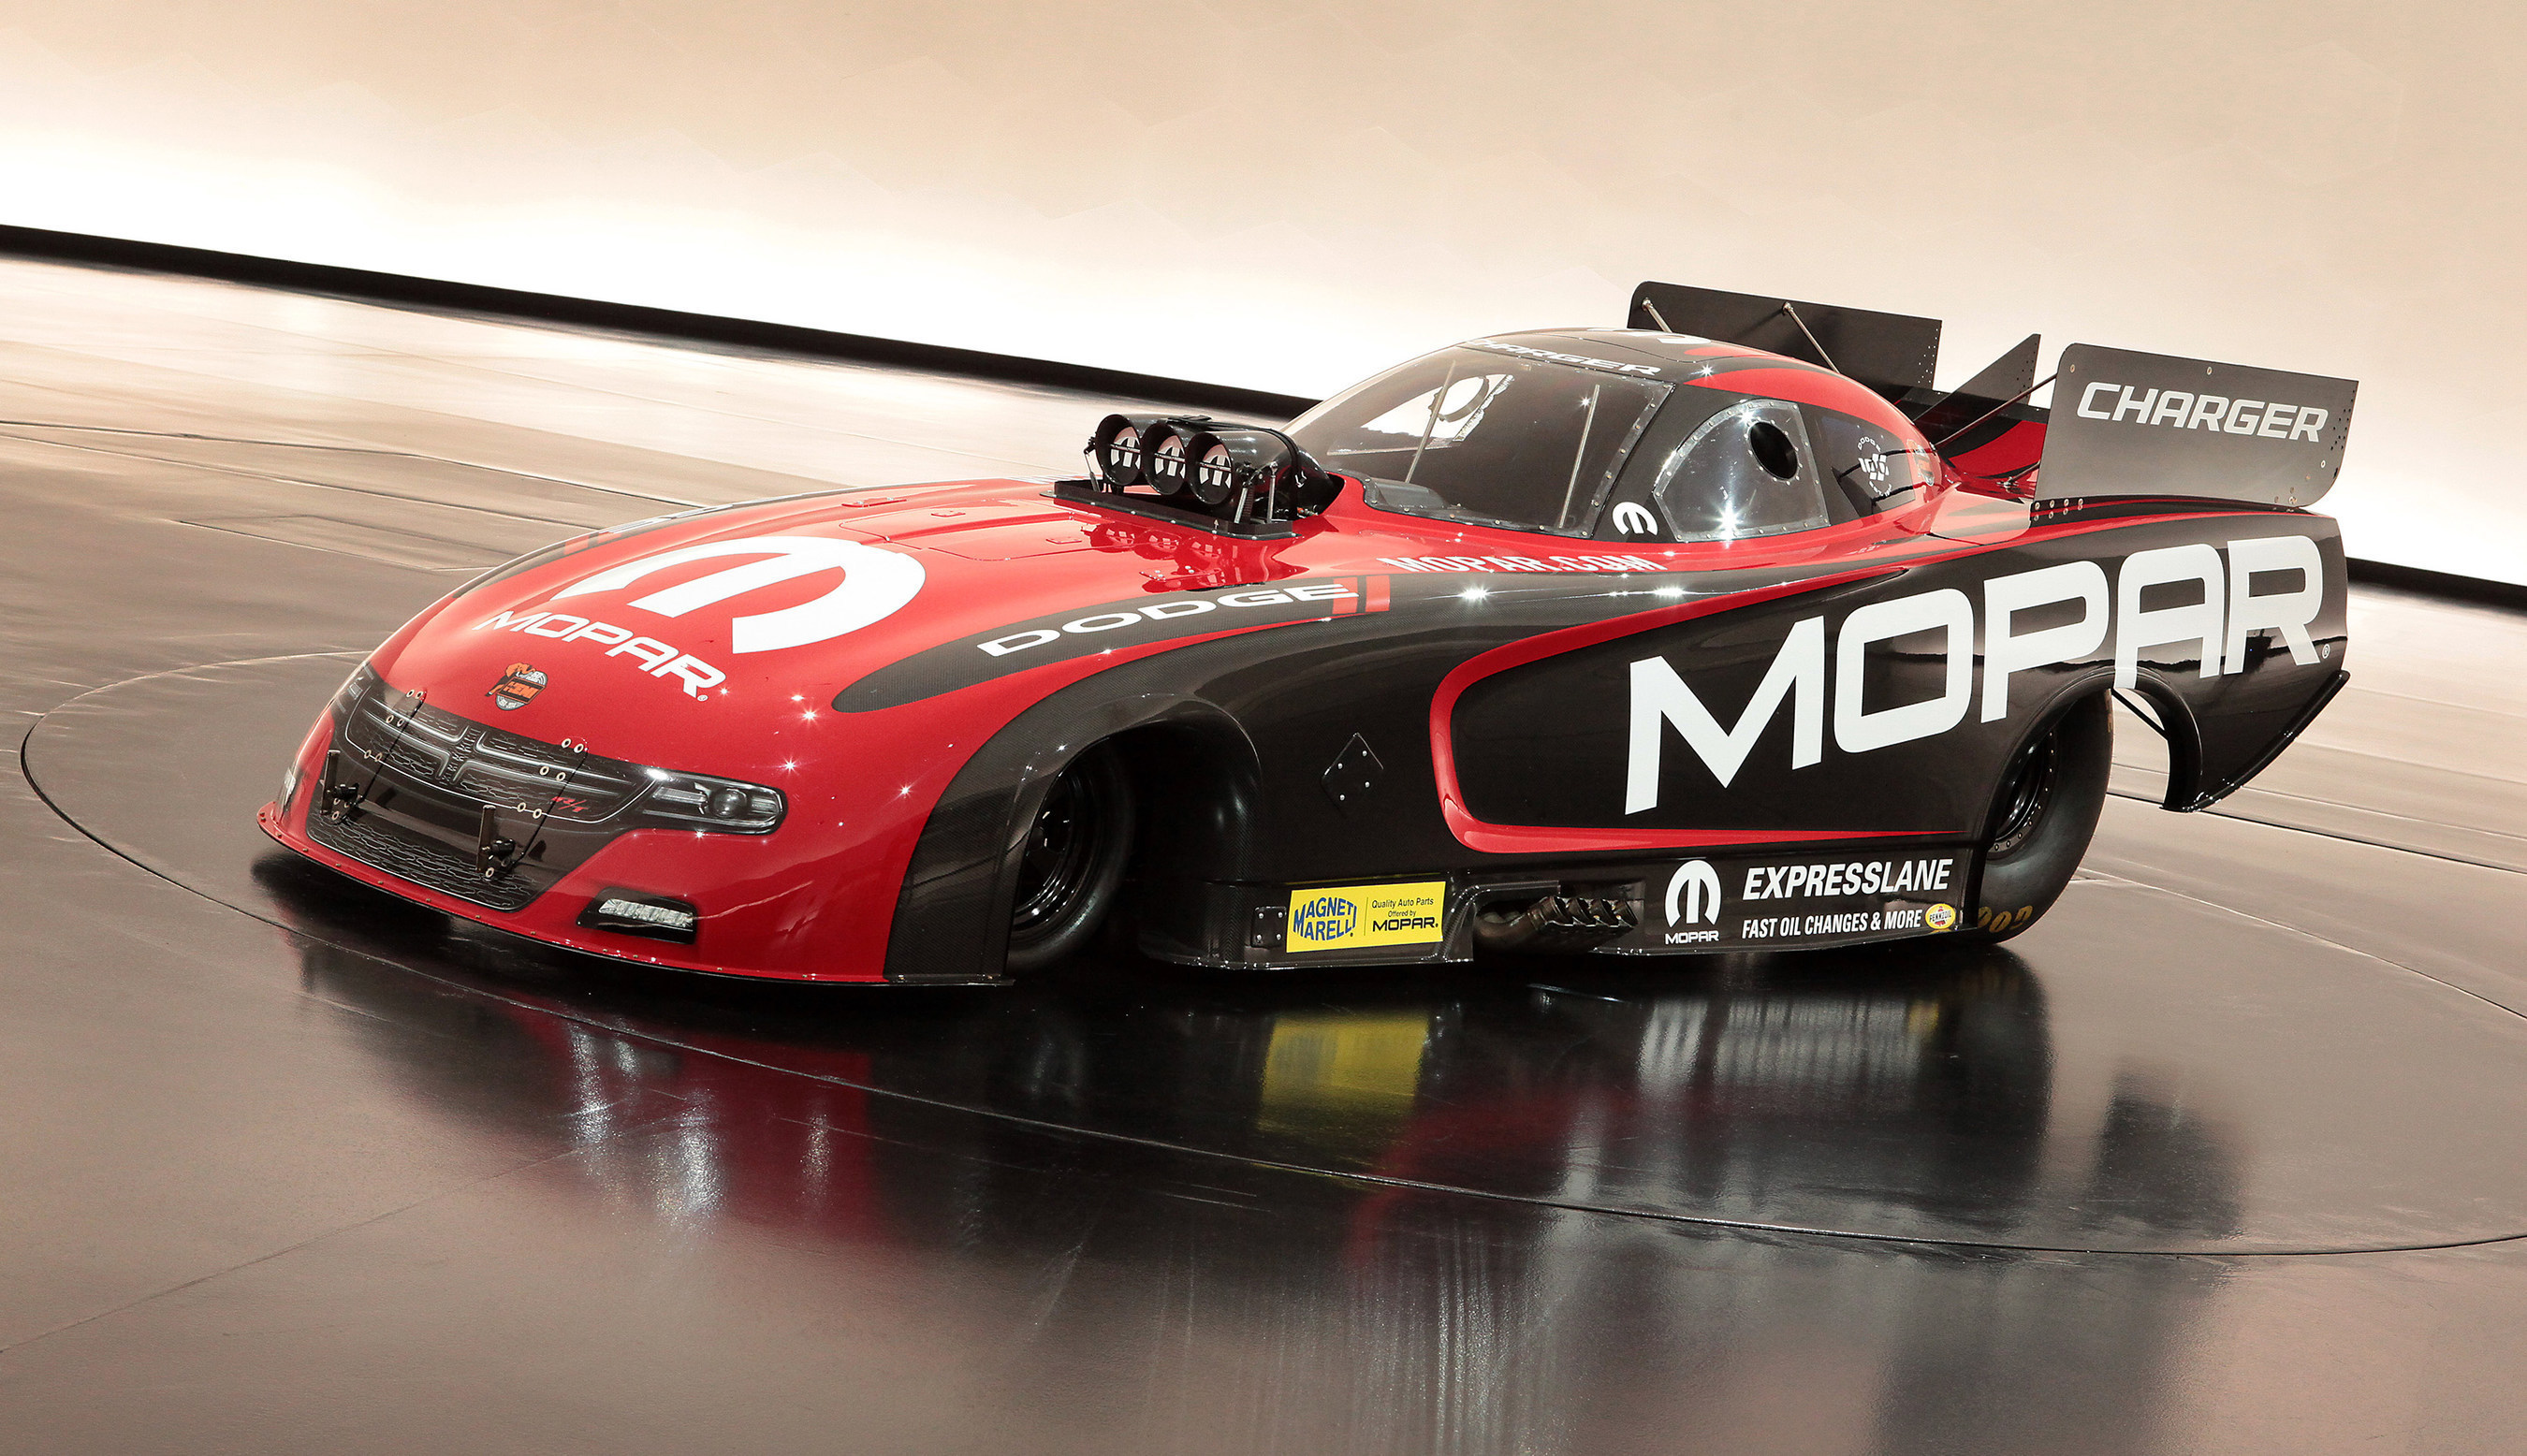 A new 2015 Mopar Dodge Charger R/T Funny Car drag racing vehicle unveiled at the SEMA.